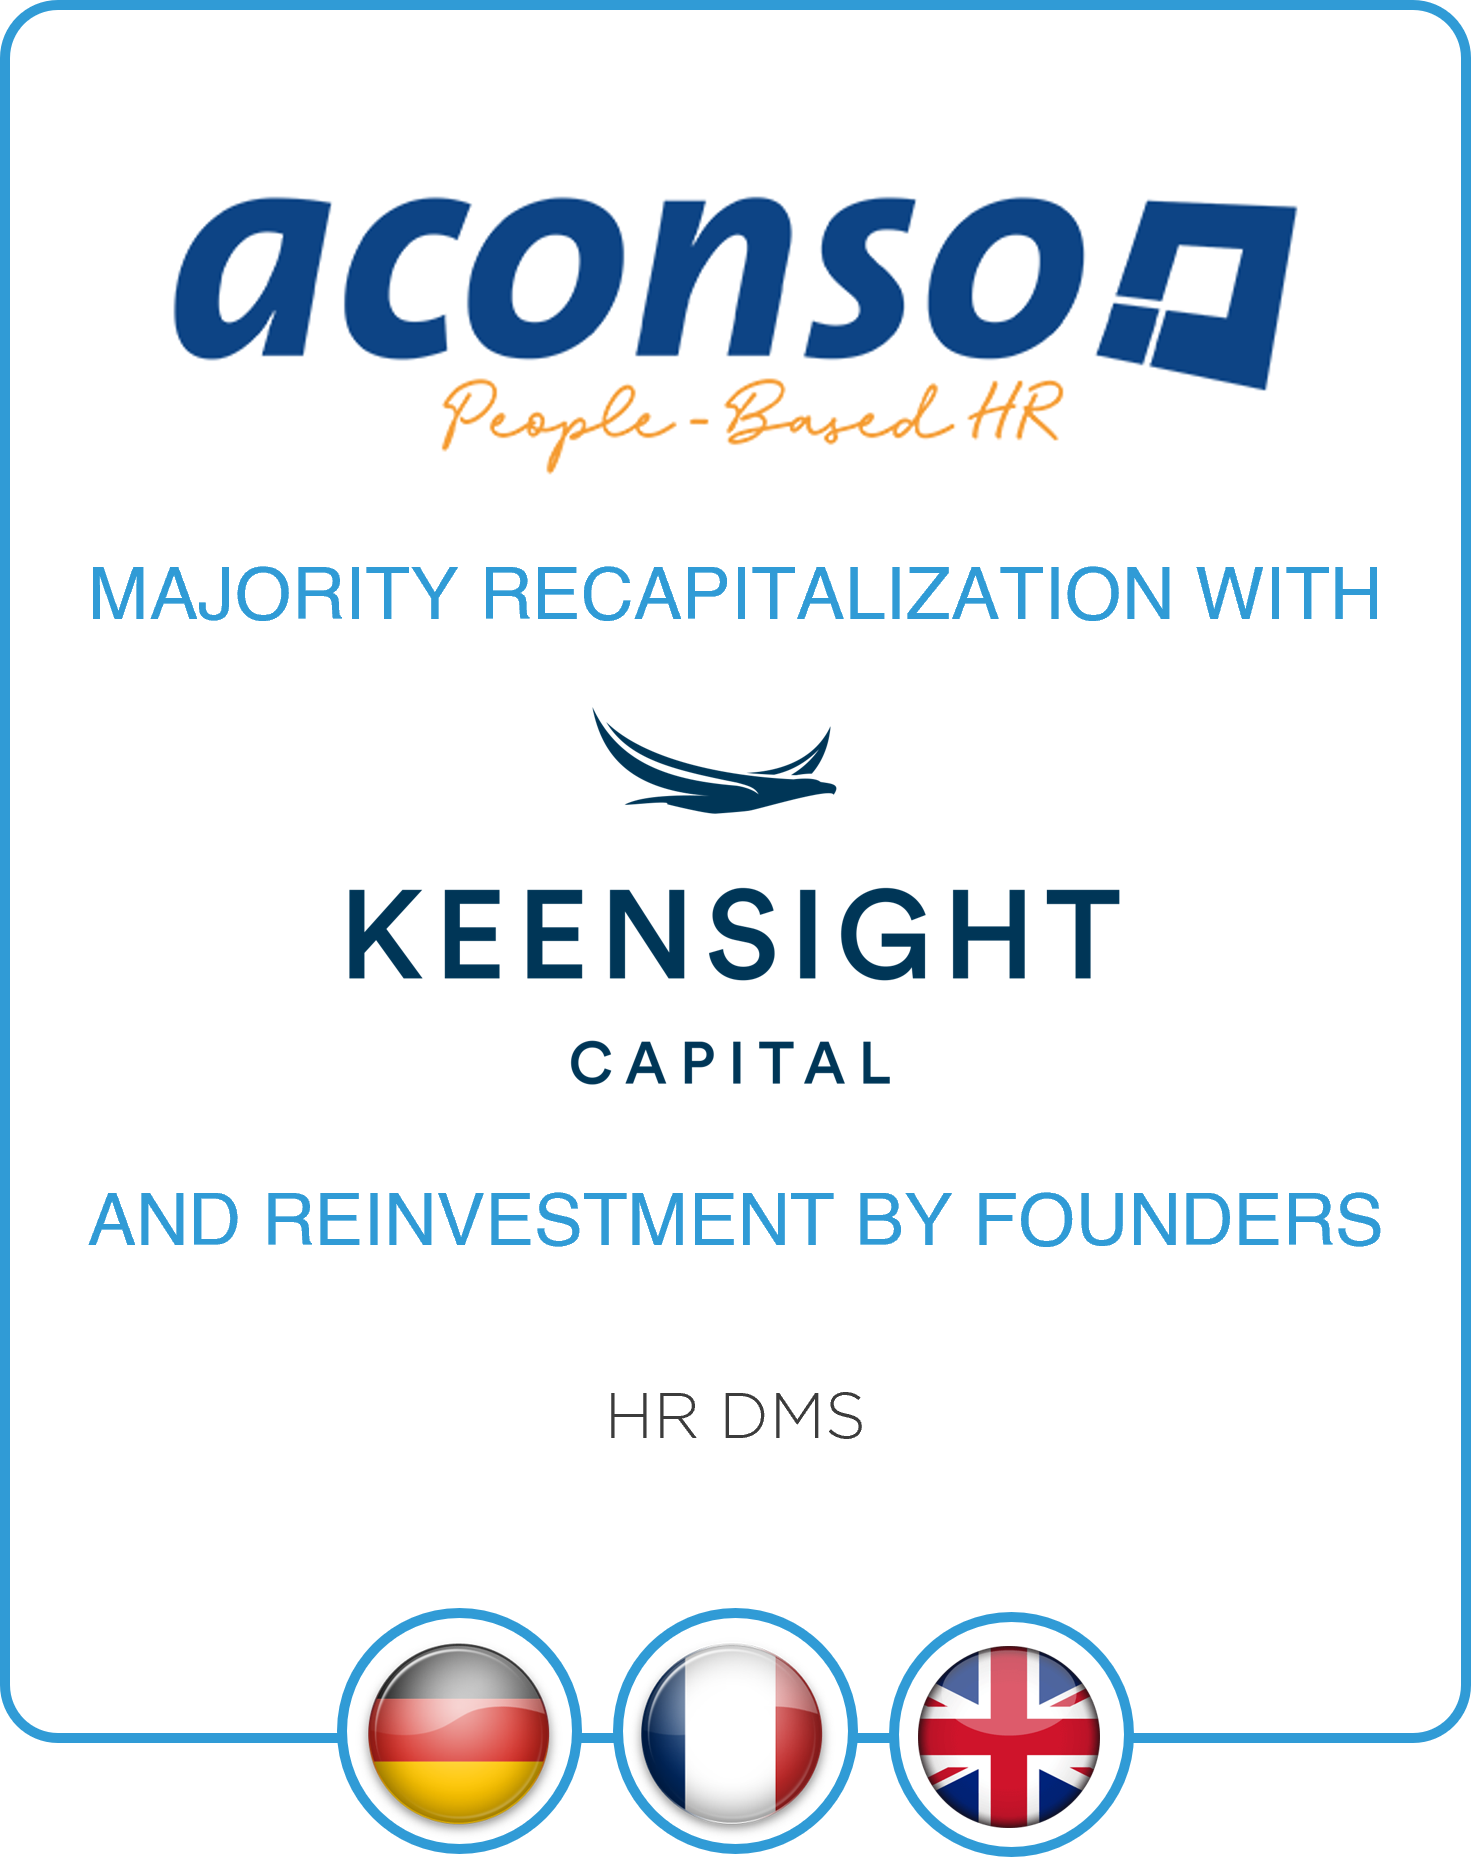 Drake Star Acts as Exclusive Financial Advisor to aconso AG on the Majority Recapitalization with Keensight Capital